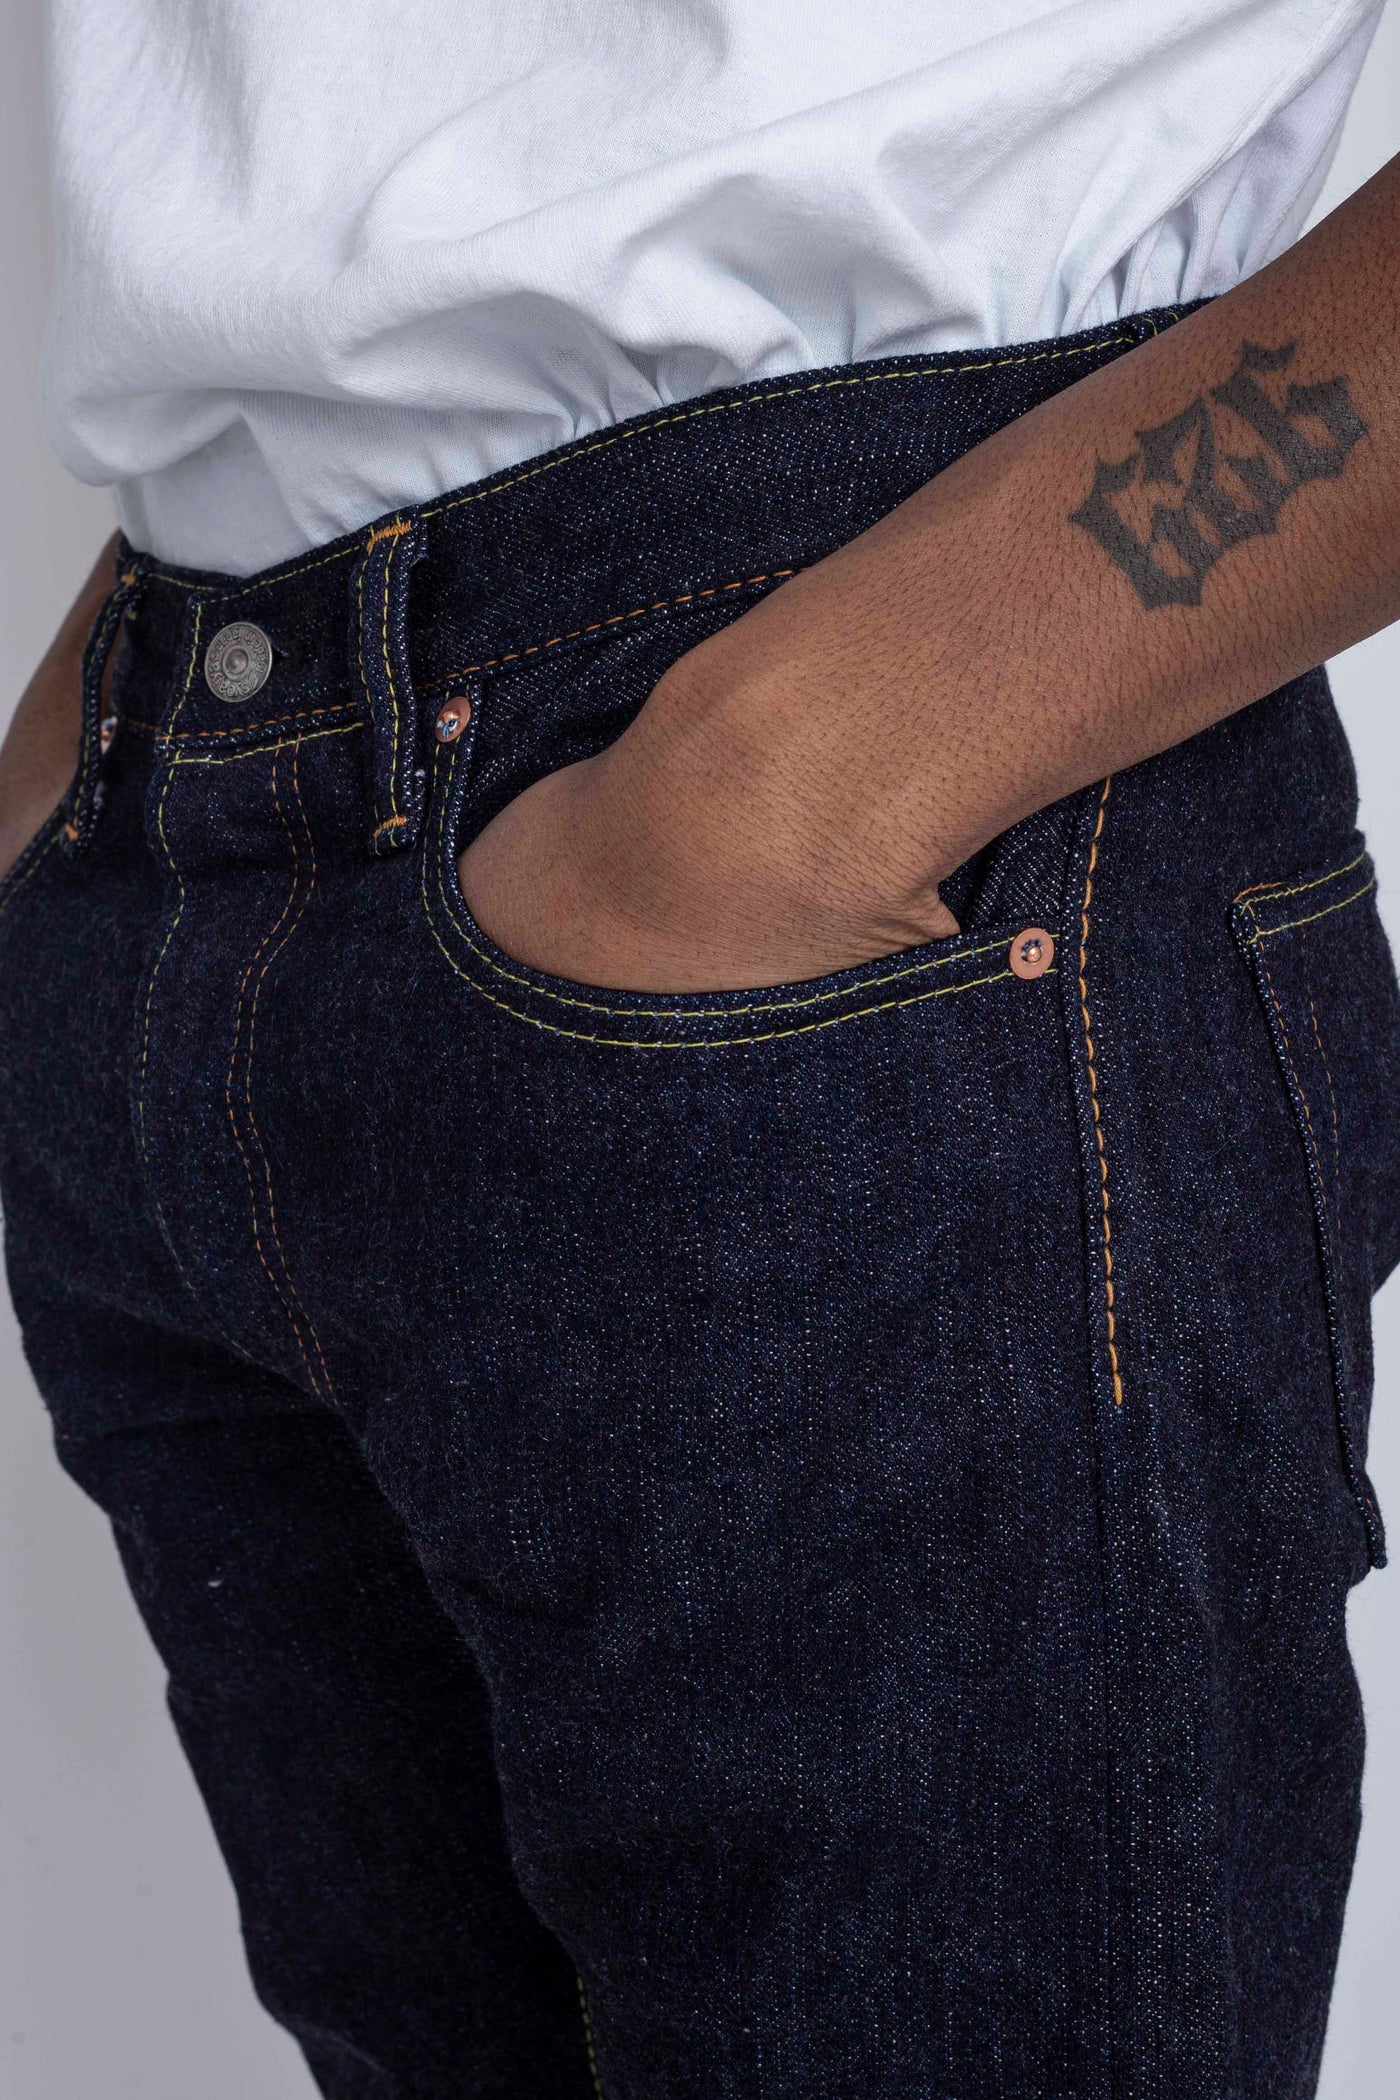 XX-013 Slim Tapered Jeans Blue In Green Exclusive Version